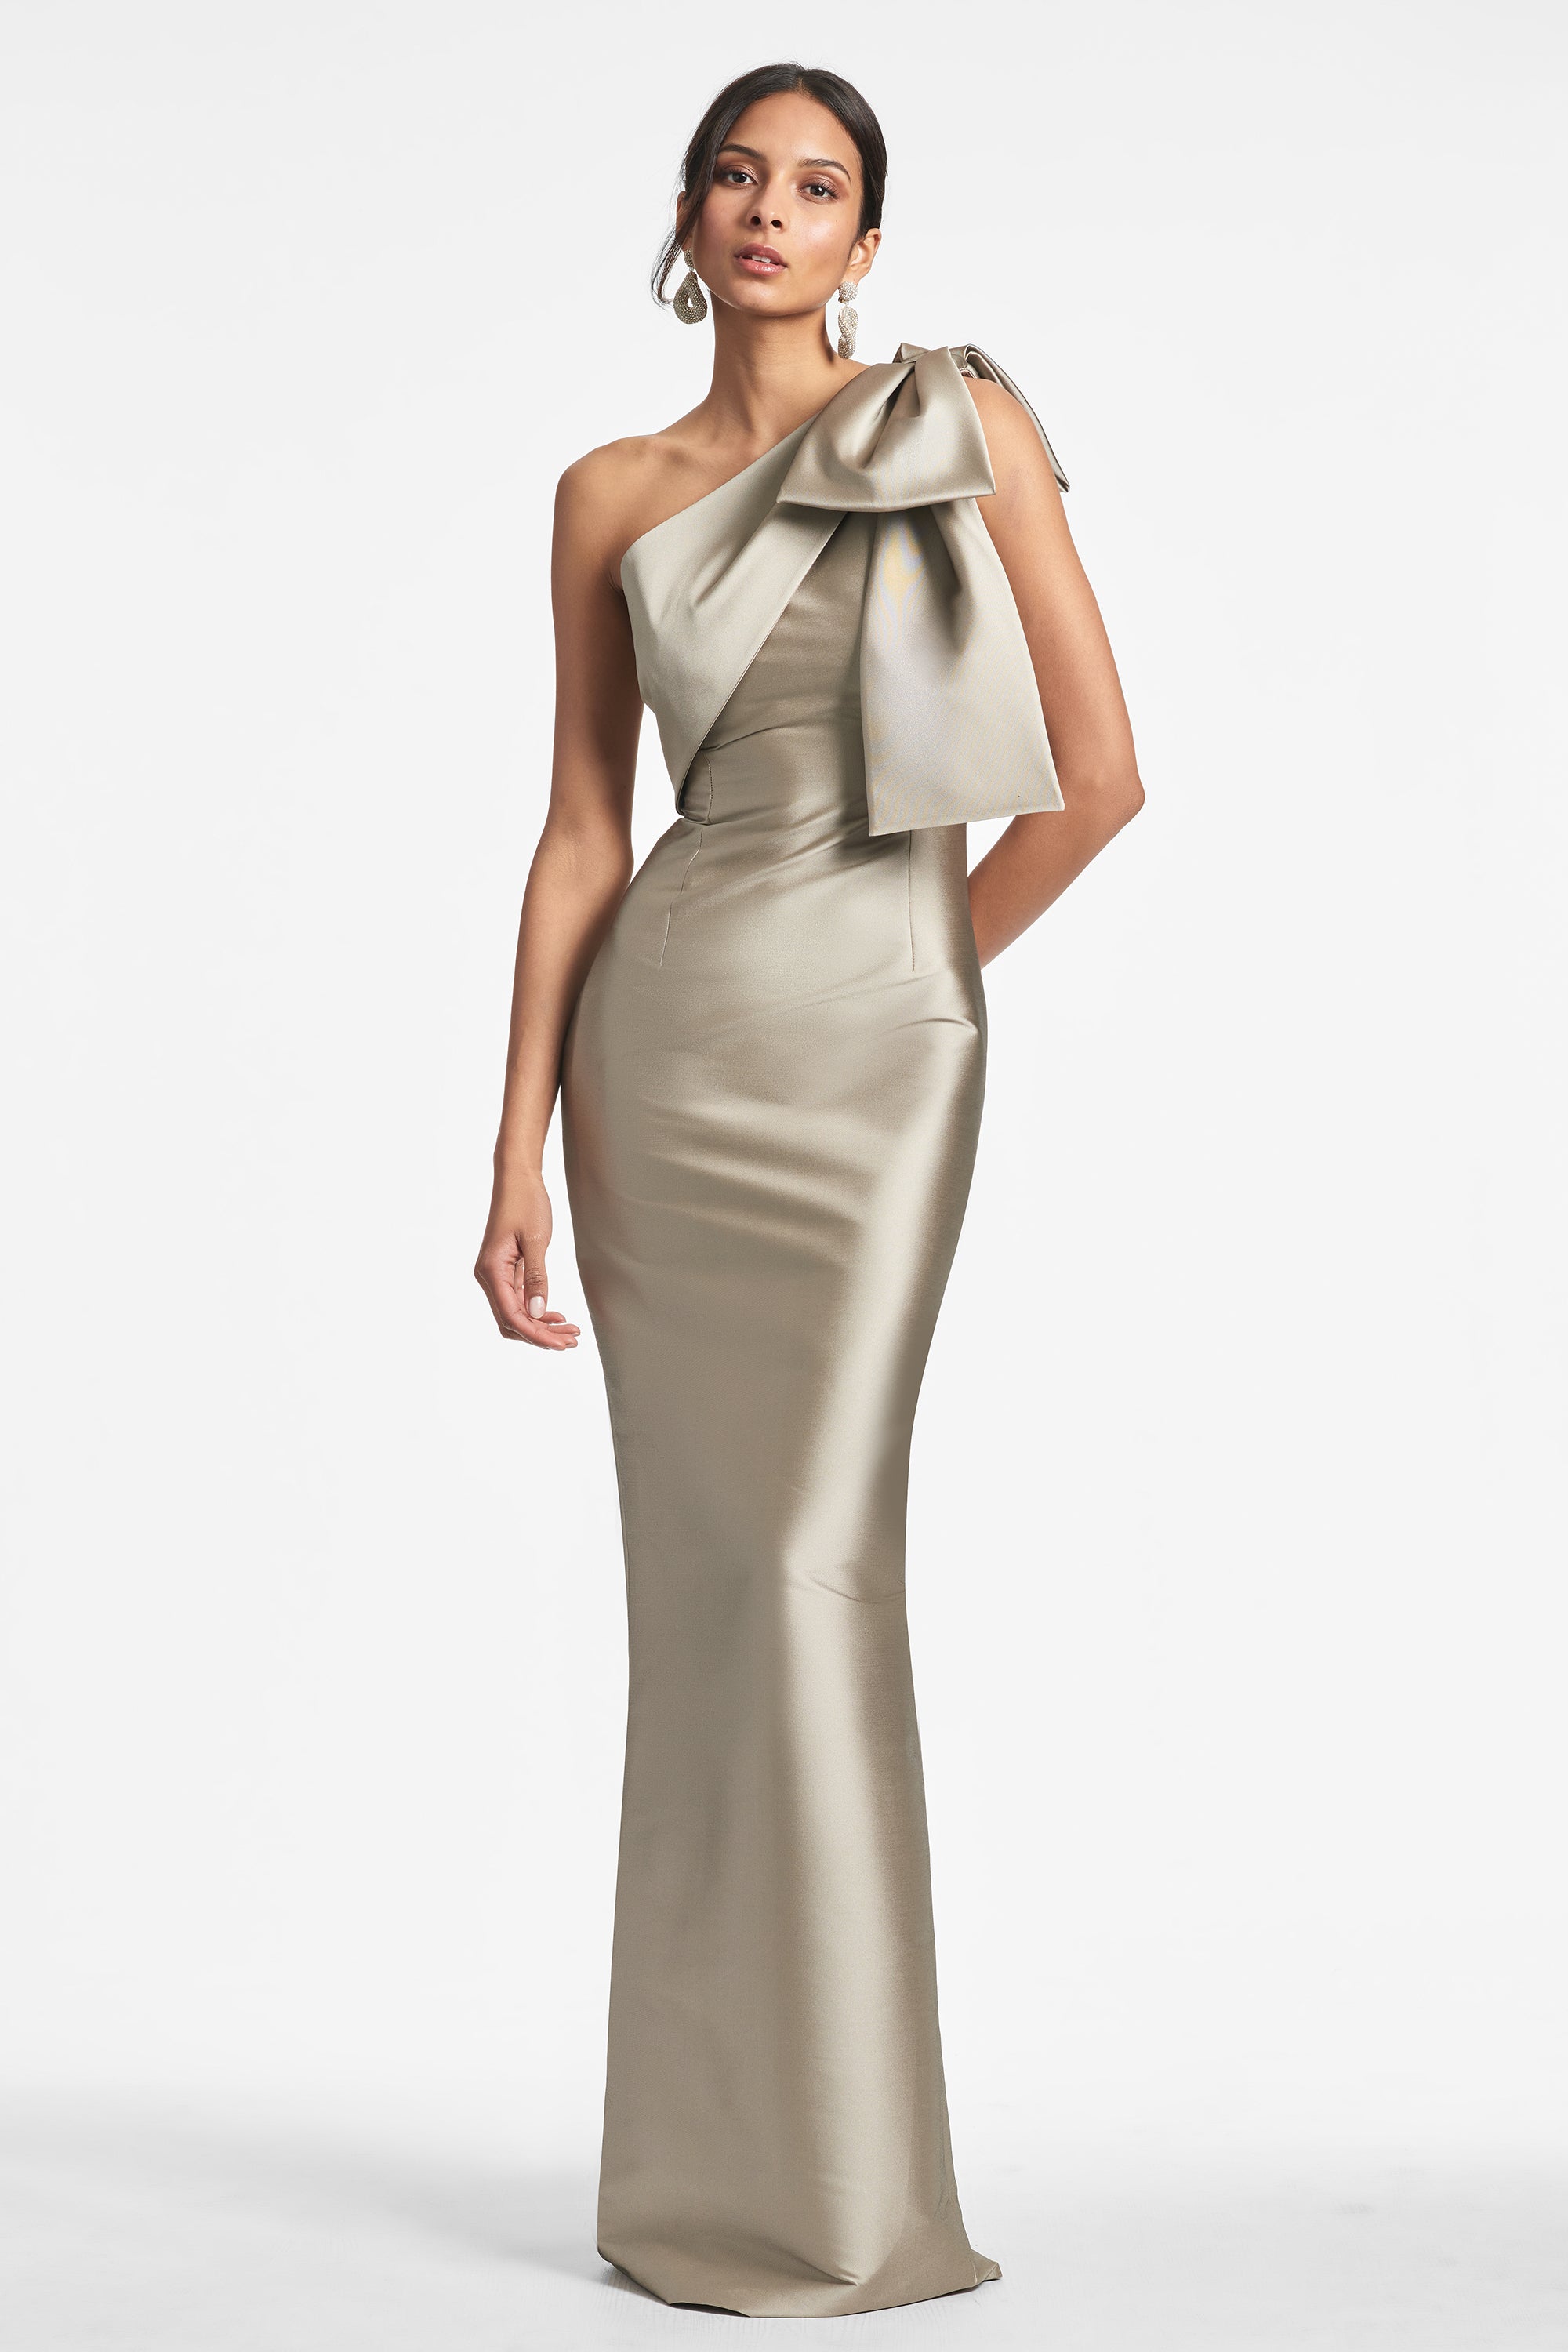 Evening Dresses SG: Tricks To Look Slimmer In Your Gown - Love, Fioyo